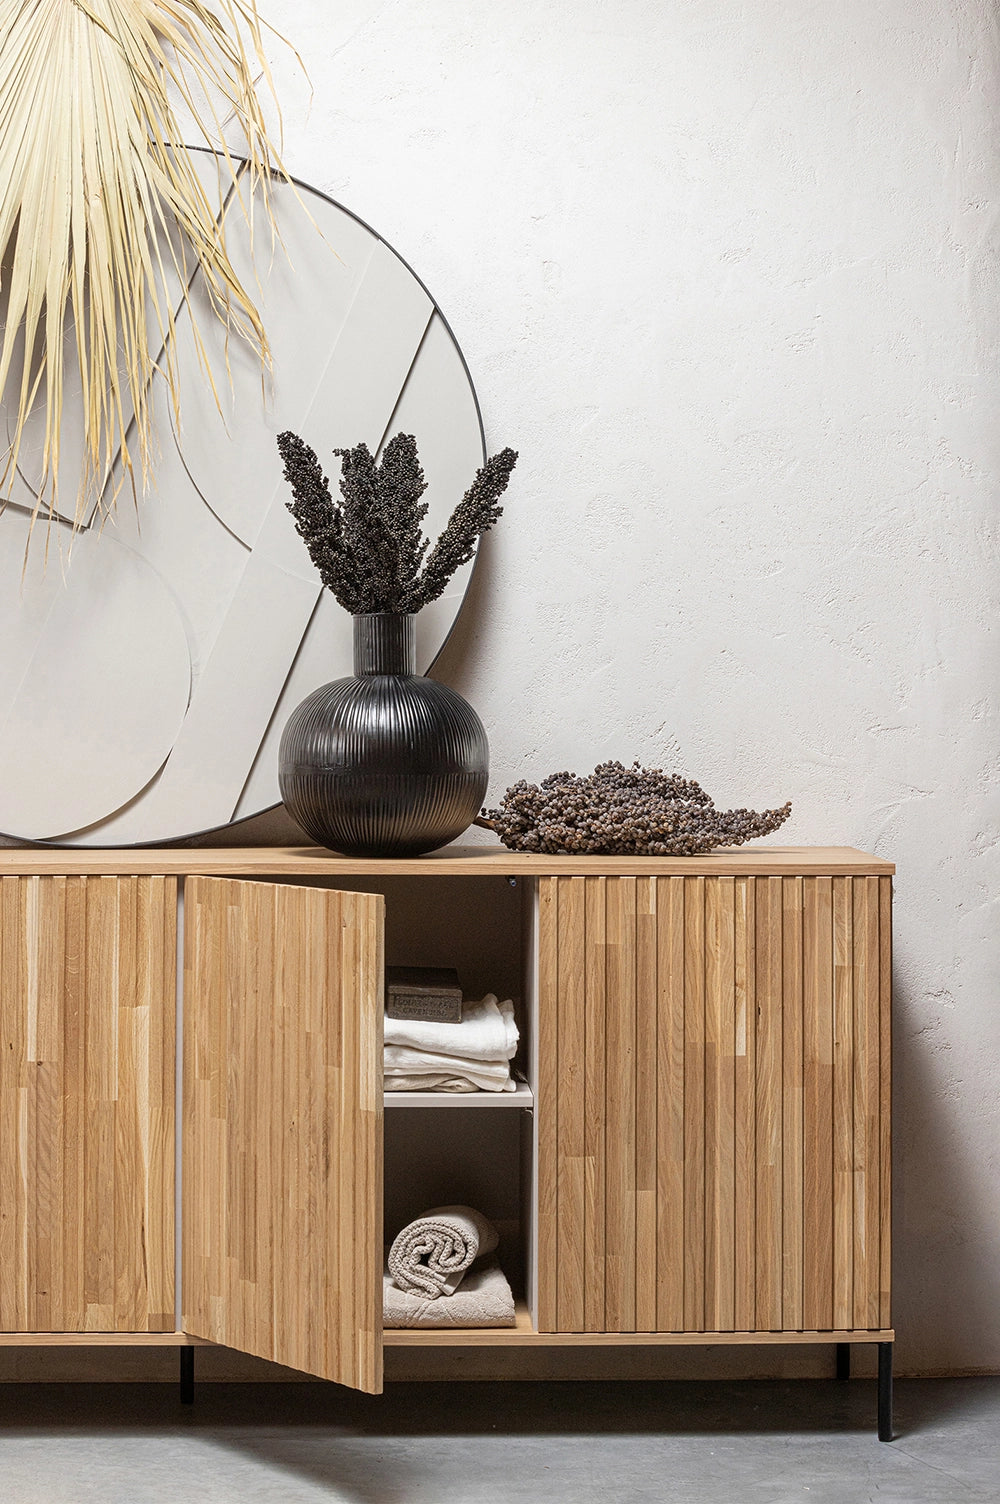 Ashley Graphic Embossed Sideboard in Natural Oak Finish with Dried Plants in Living Room Setting 2